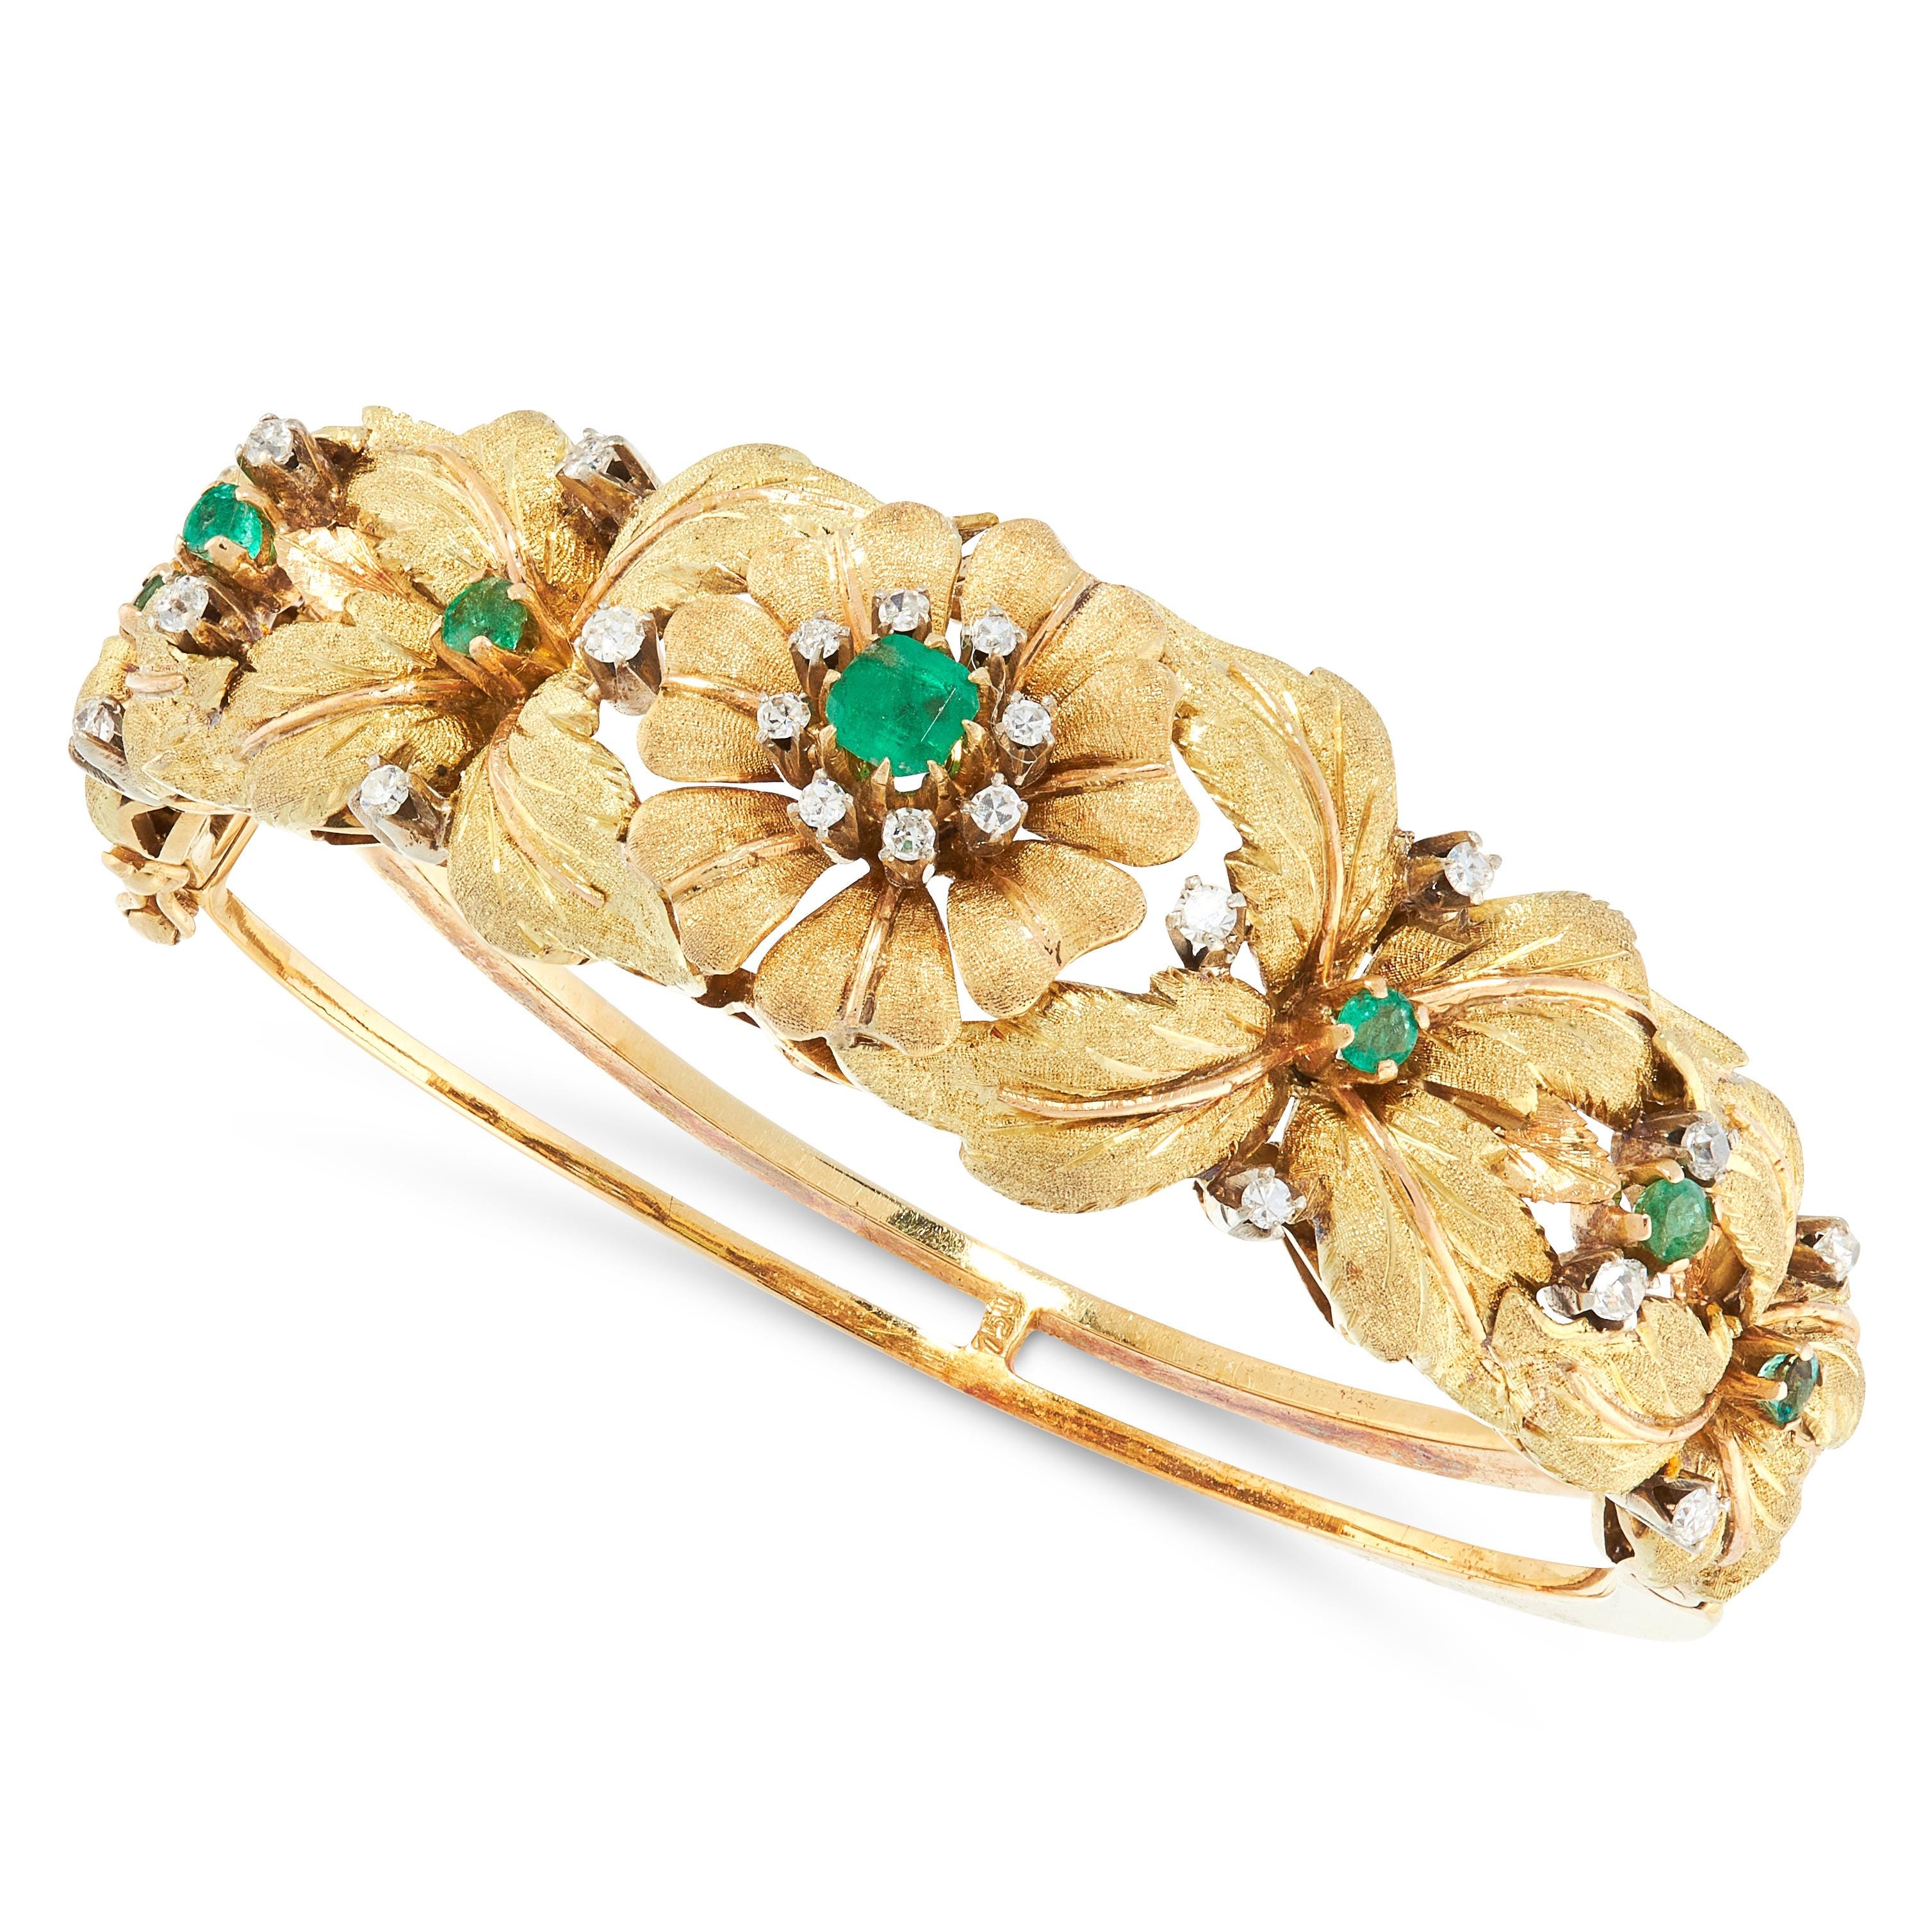 A VINTAGE EMERALD AND DIAMOND BANGLE, CIRCA 1950 in 18ct yellow gold, the tapering body with applied